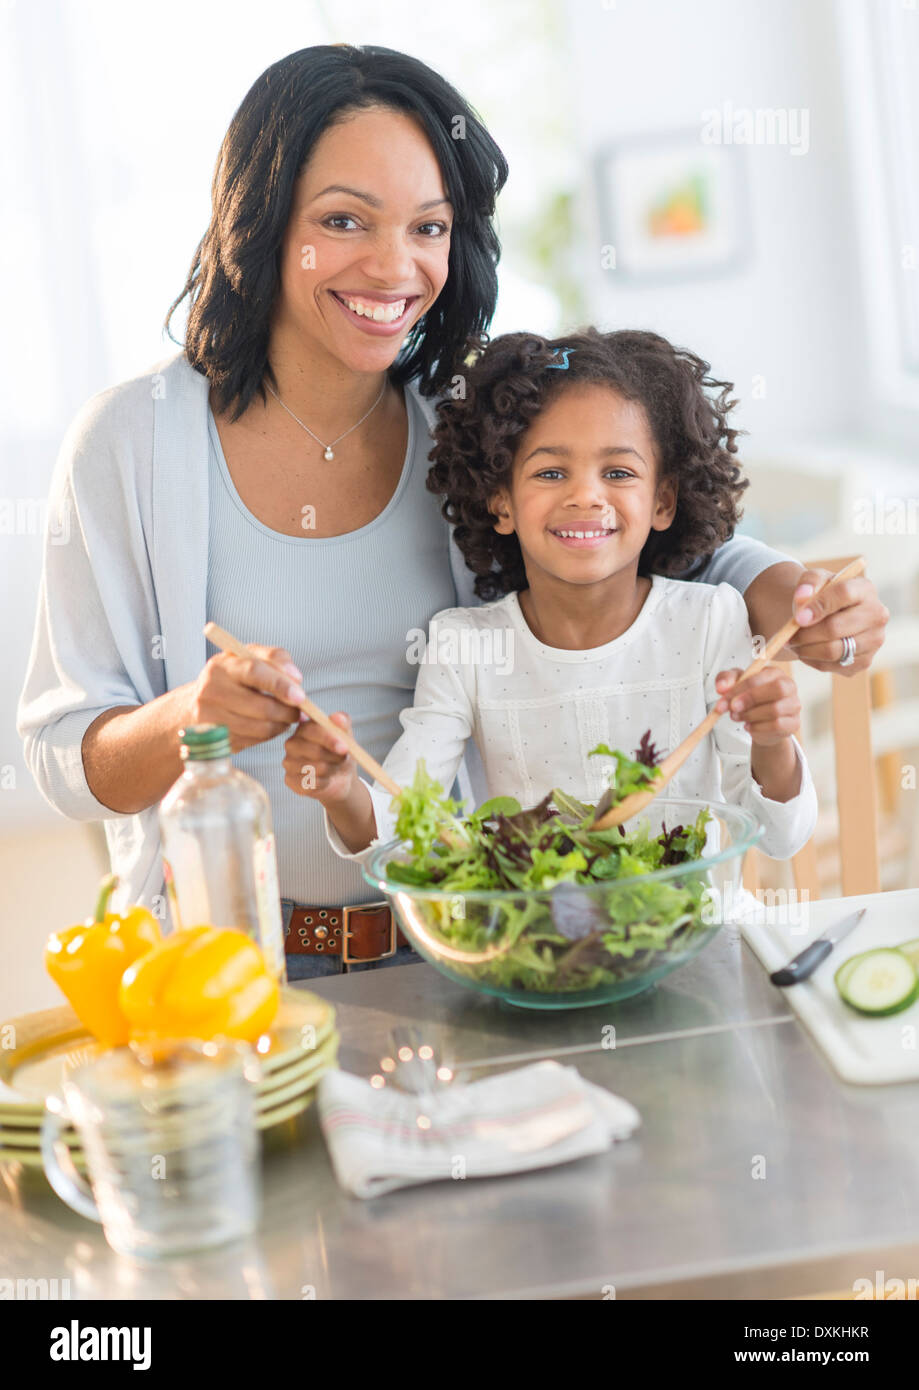 African American mother and daughter tossing salad Stock Photo